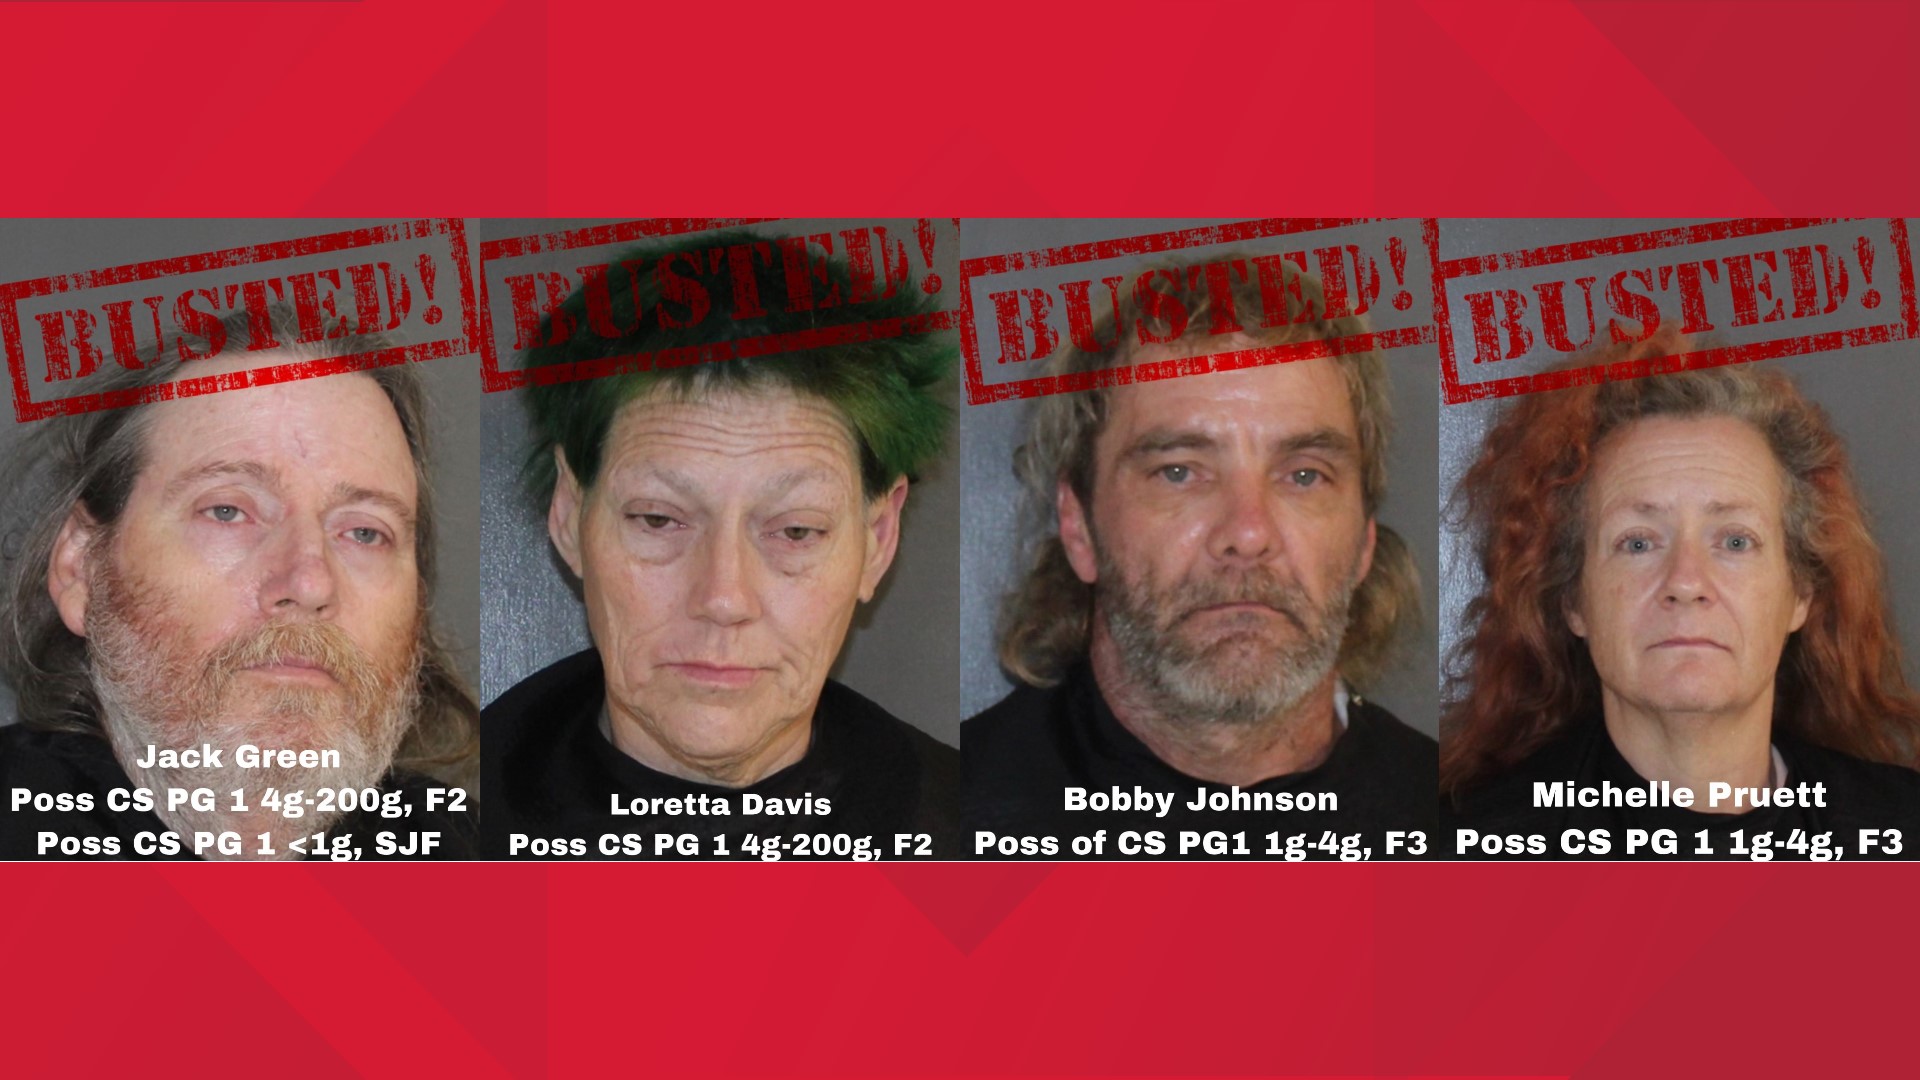 Rusk County Sheriffs Office Arrests 4 Executing Search Warrant Cbs19tv 